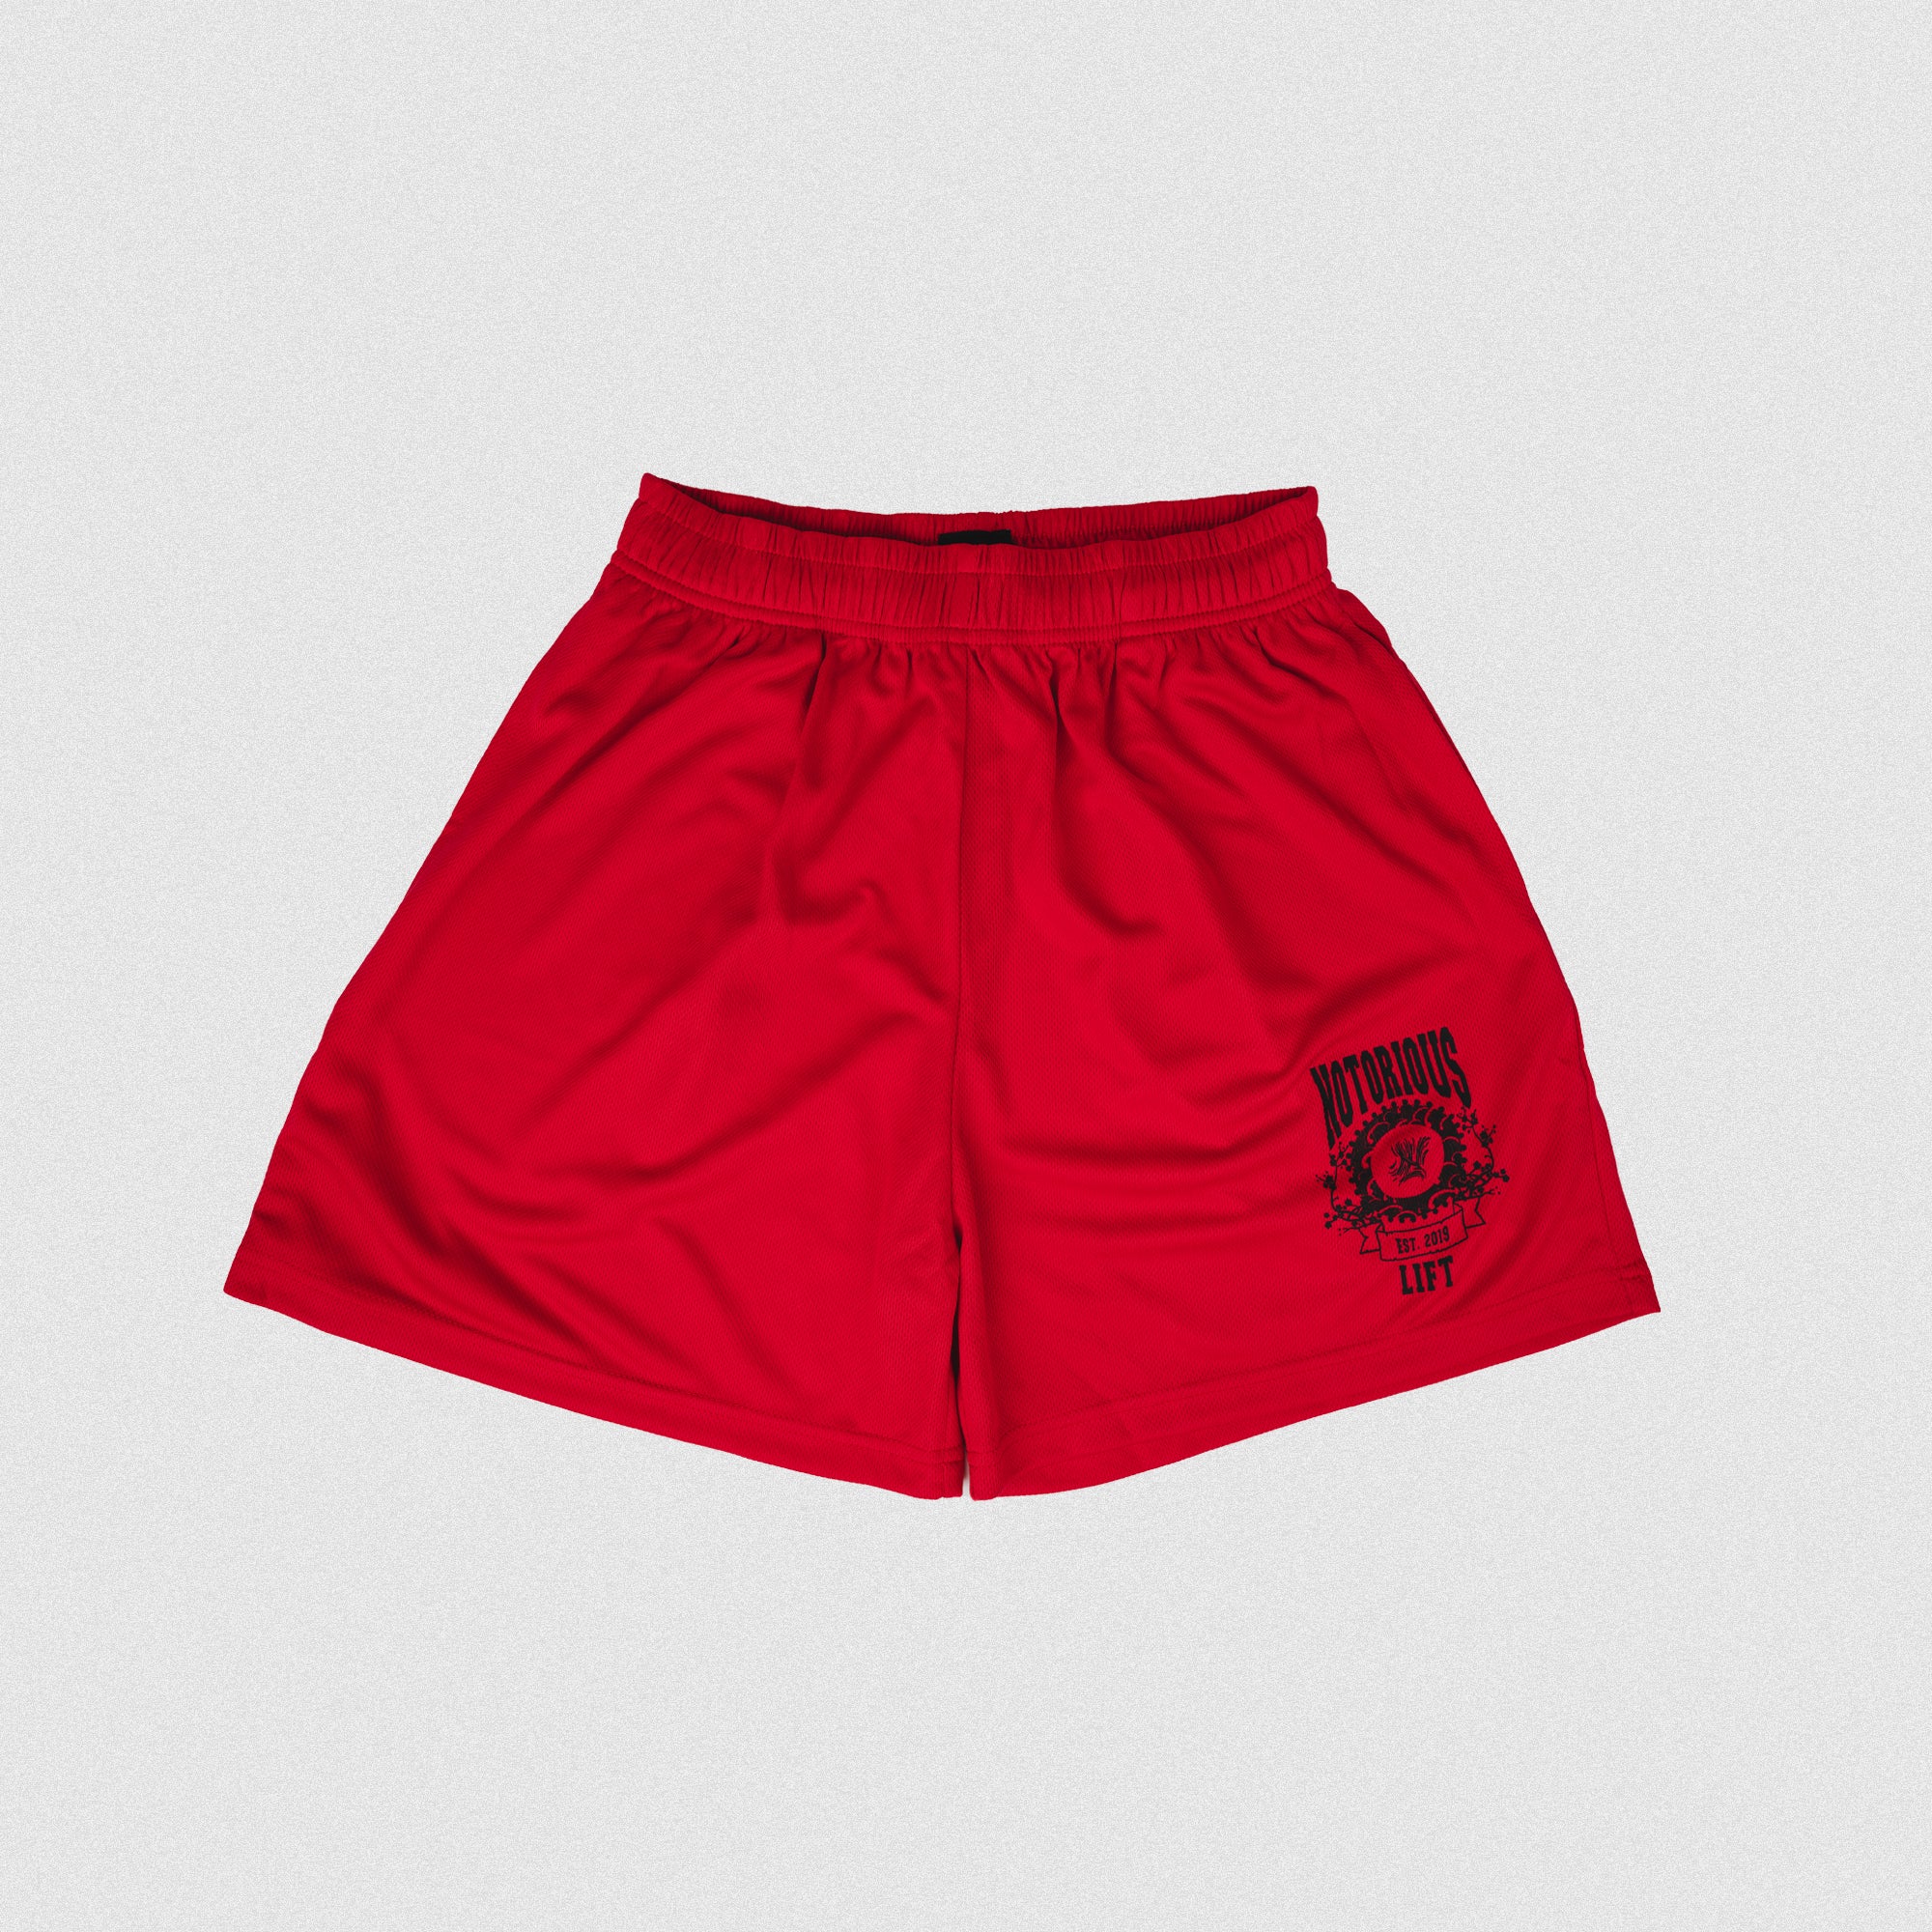 LIMITED EDITION VARSITY MESH SHORTS FIERY RED